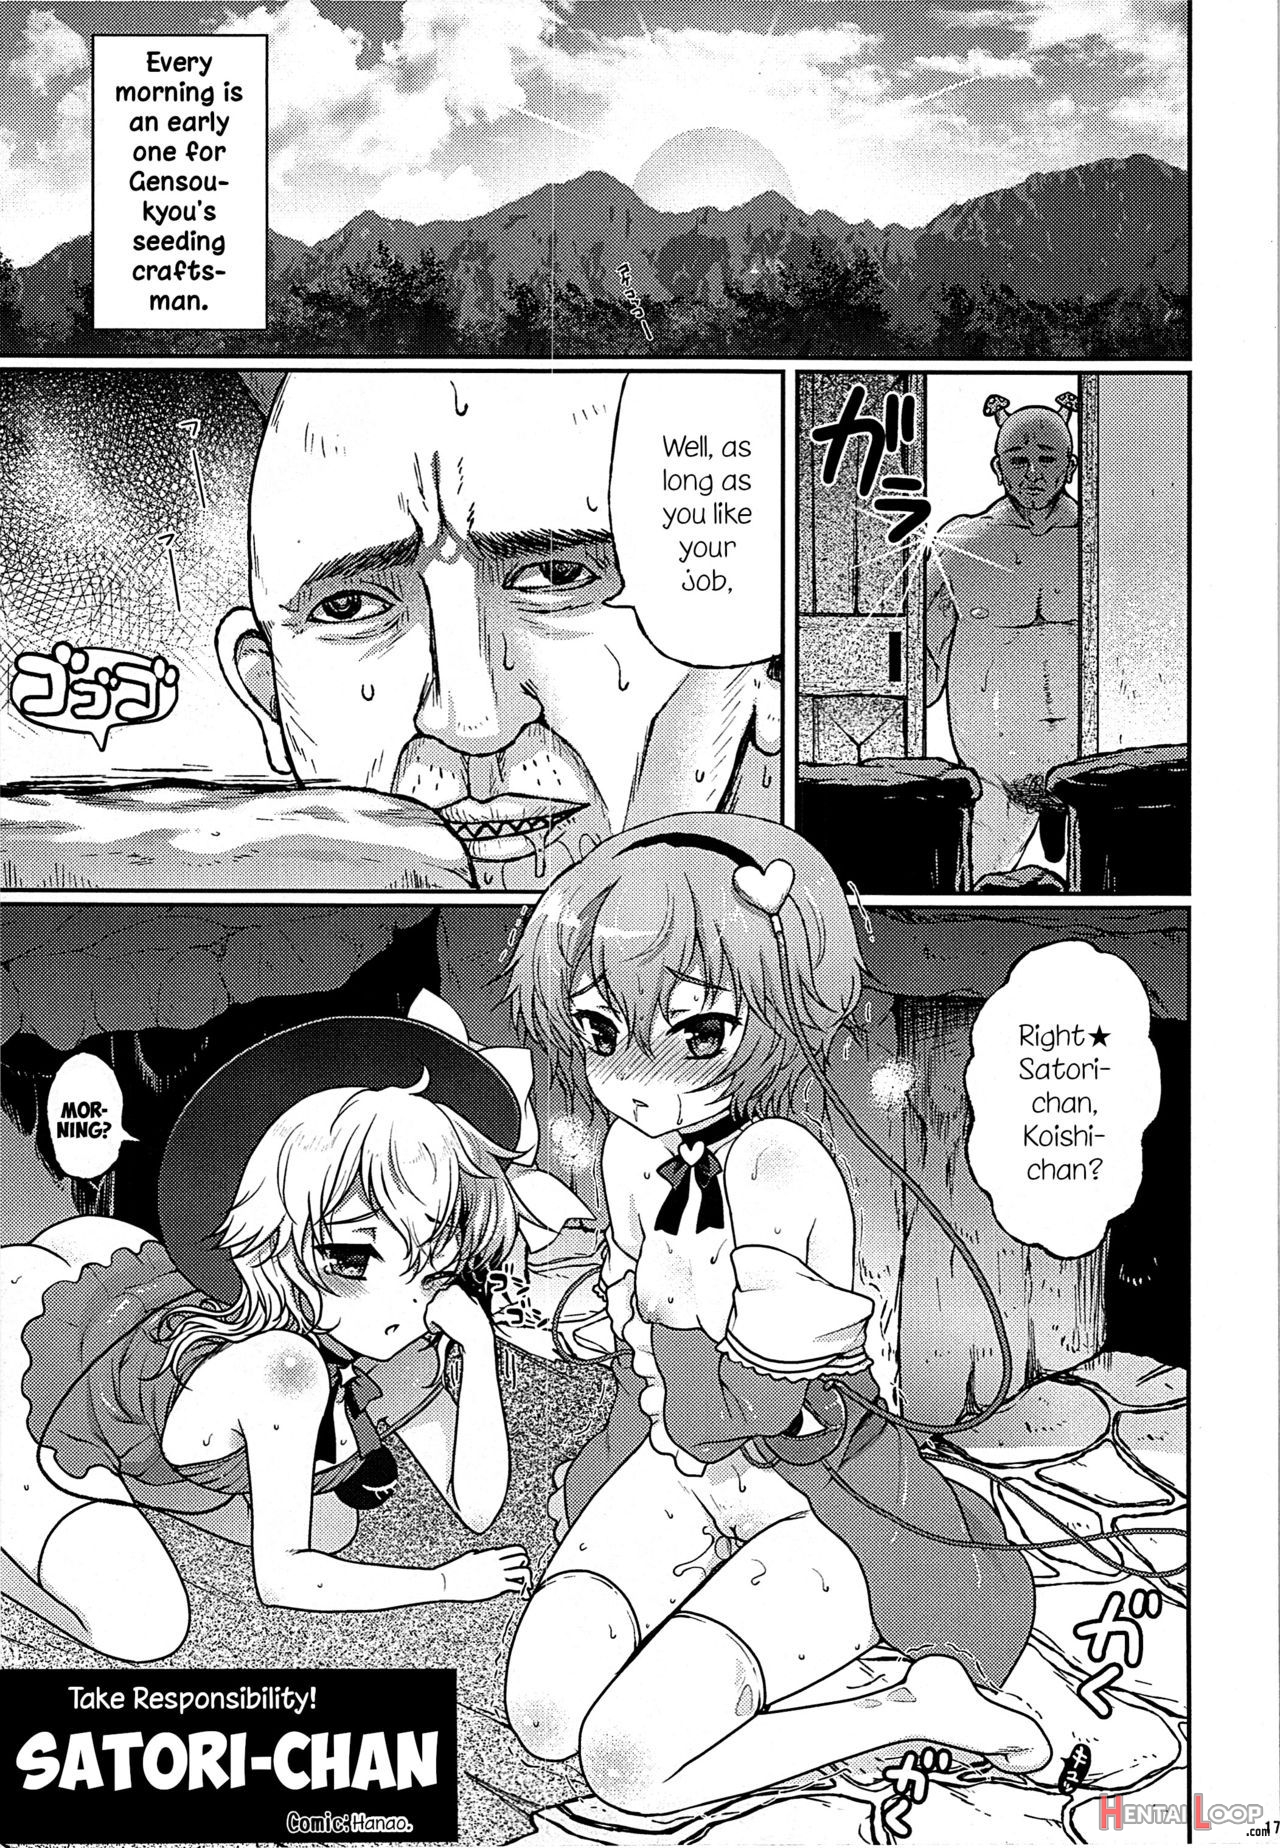 Hooray! A Seeding Uncle Has Made It Into Gensoukyou page 179